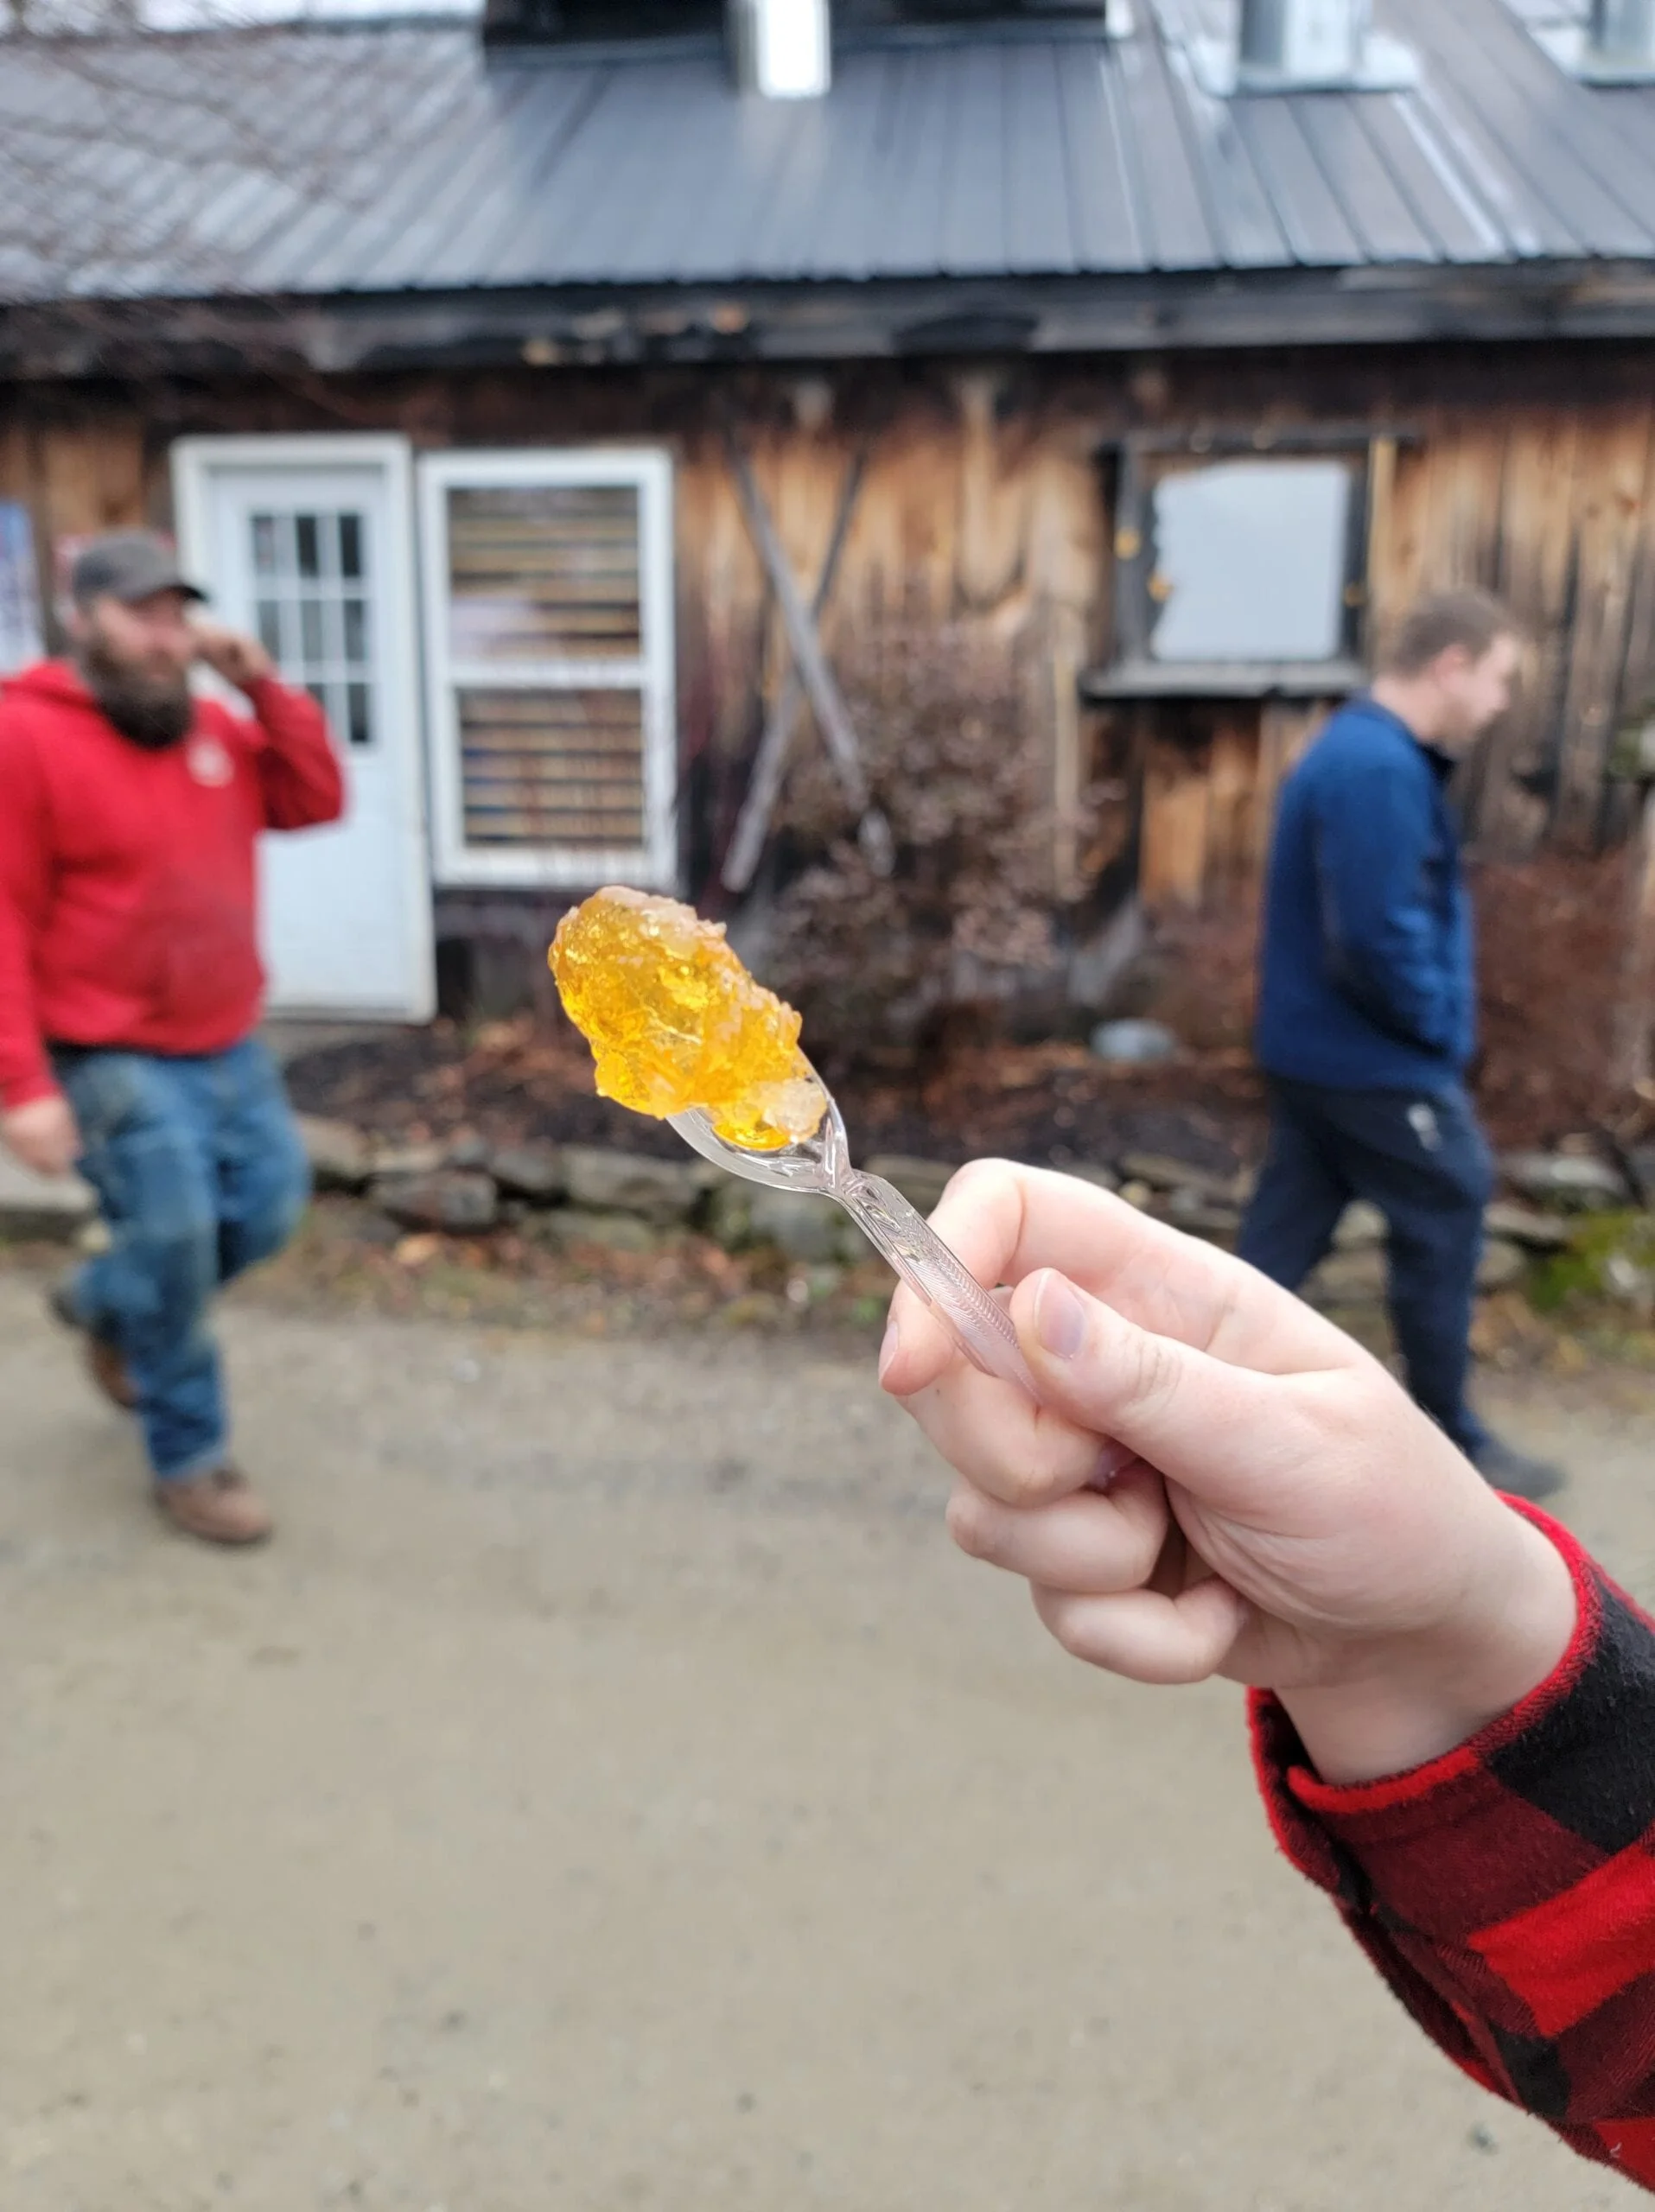 A hand holds up a plastic spoon that is coated in chilled maple syrup, known as sugar on snow.